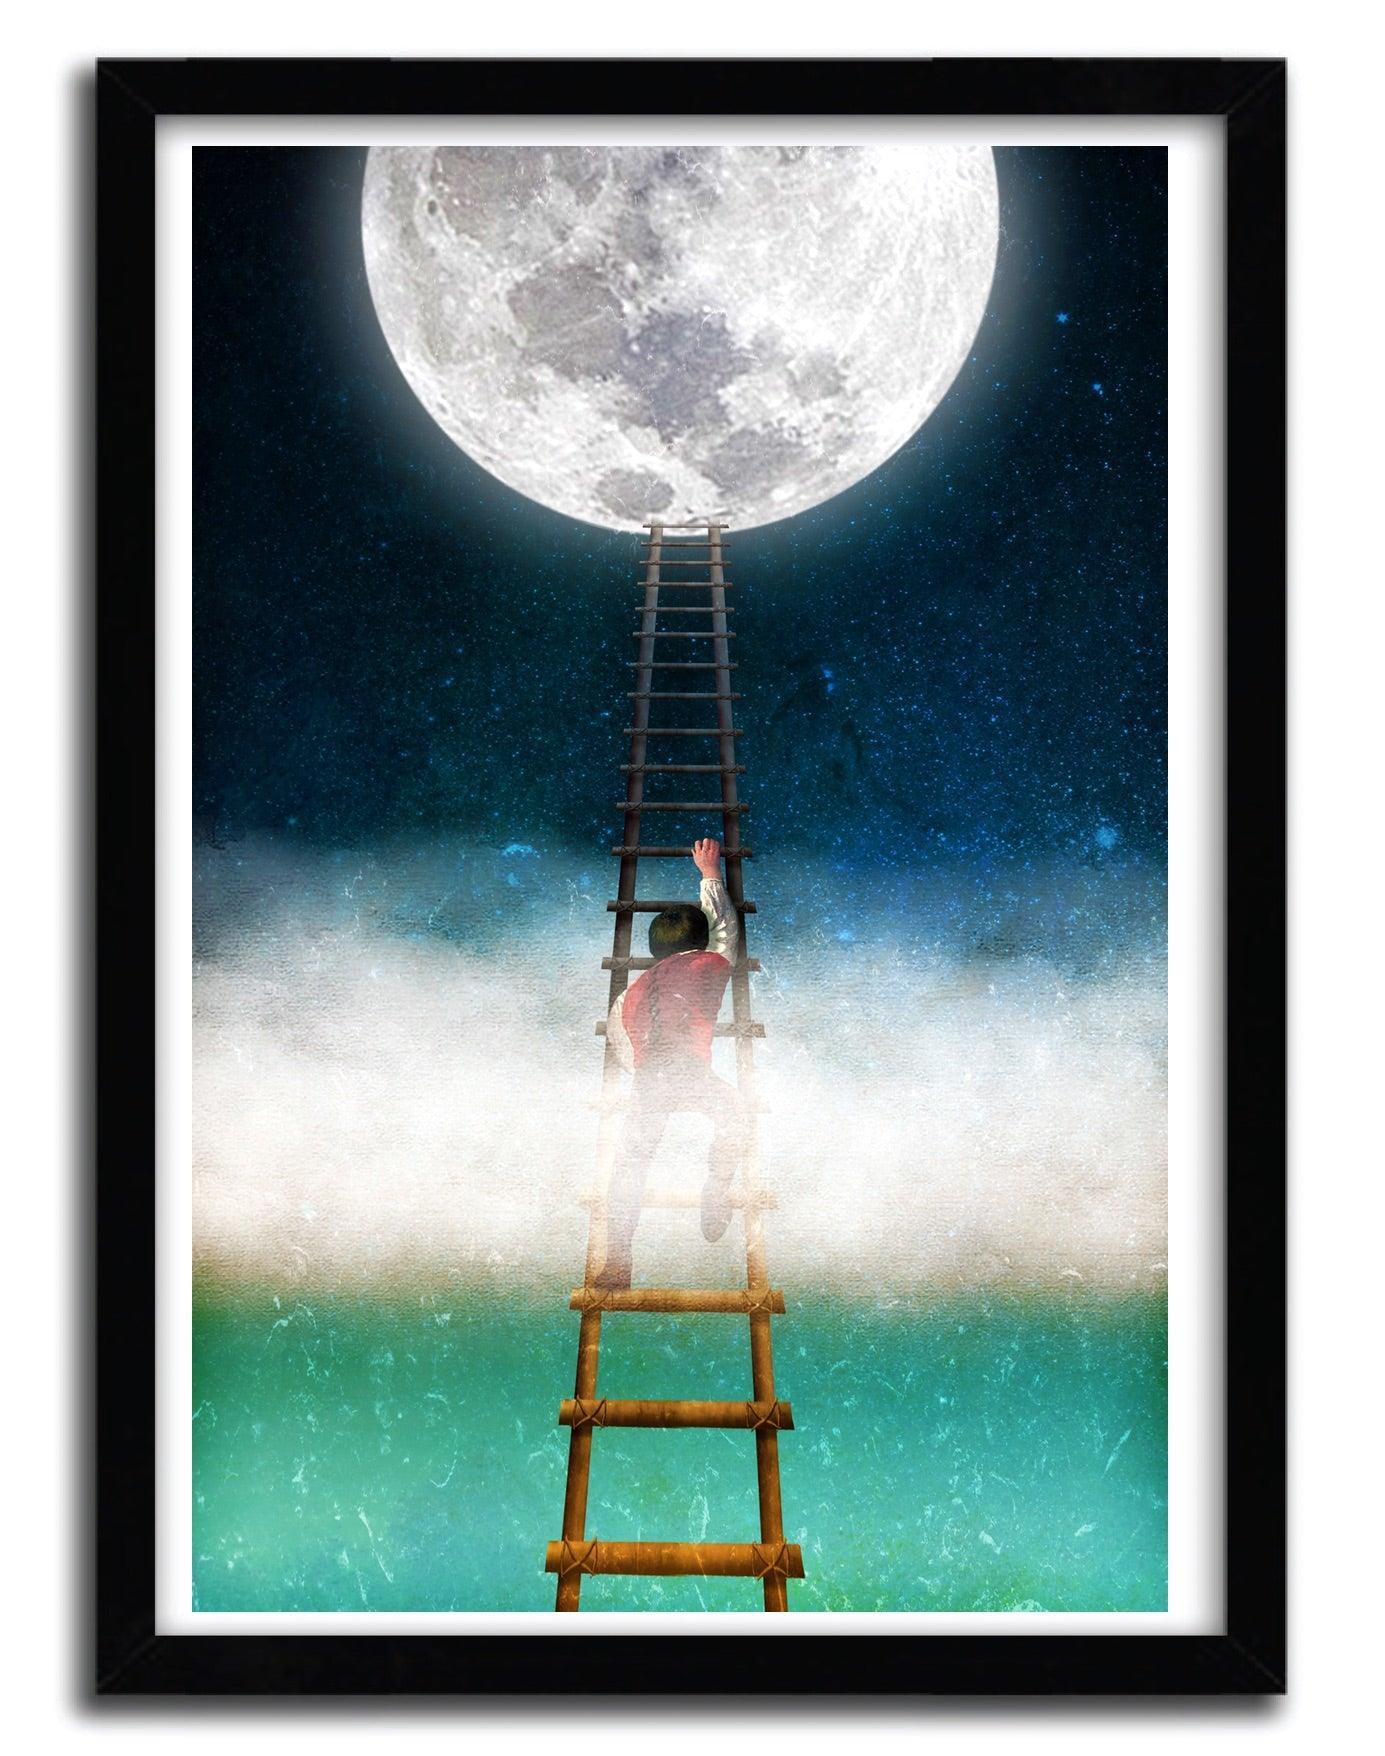 Affiche Reach for the Moon v1 by DIOGO VERISSIMO ArtAndToys